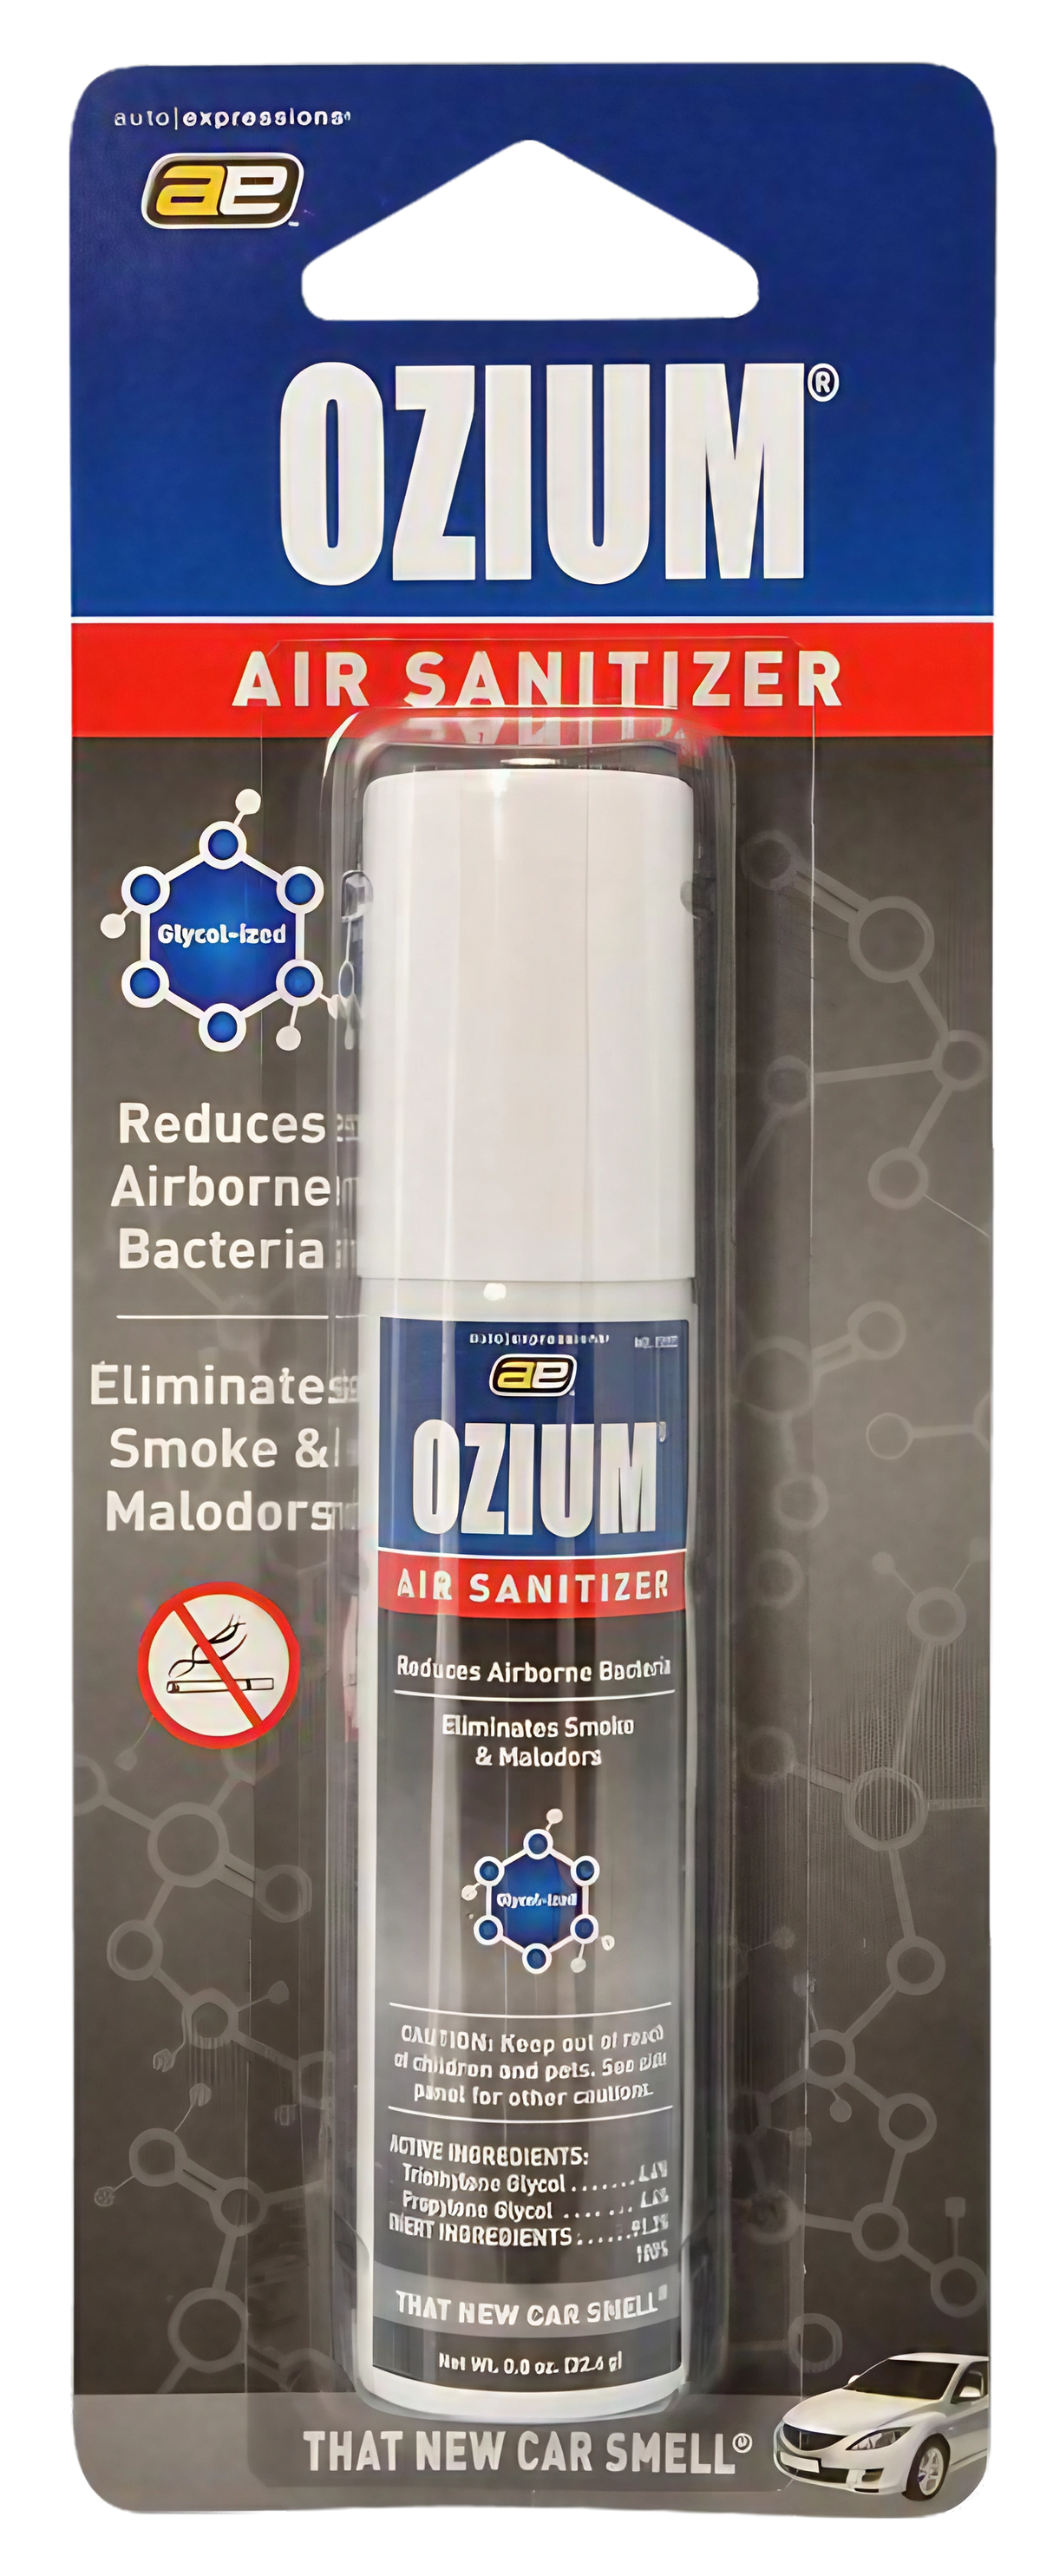 Ozium New Car Scent 0.8oz Air Sanitizer front view on retail packaging